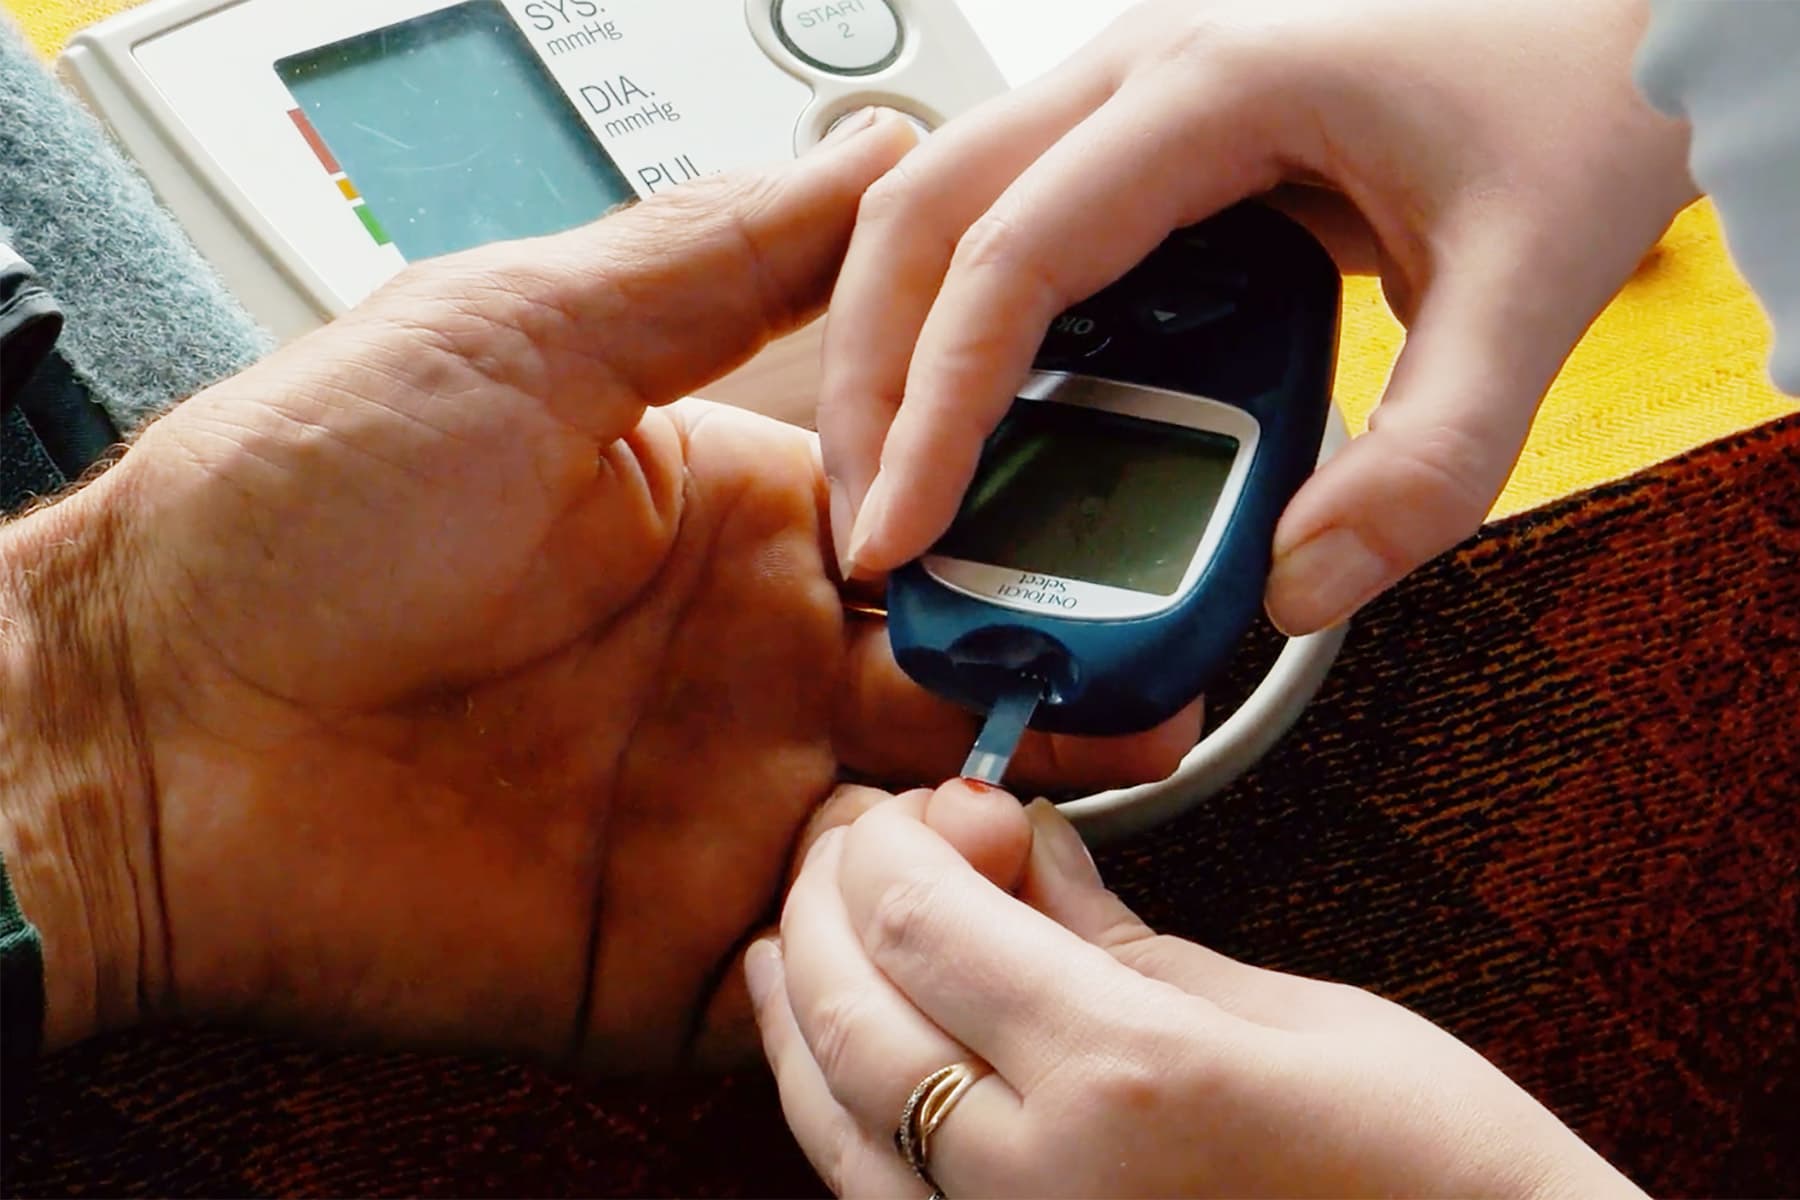 Do You Need Insulin for Your Type 2 Diabetes?